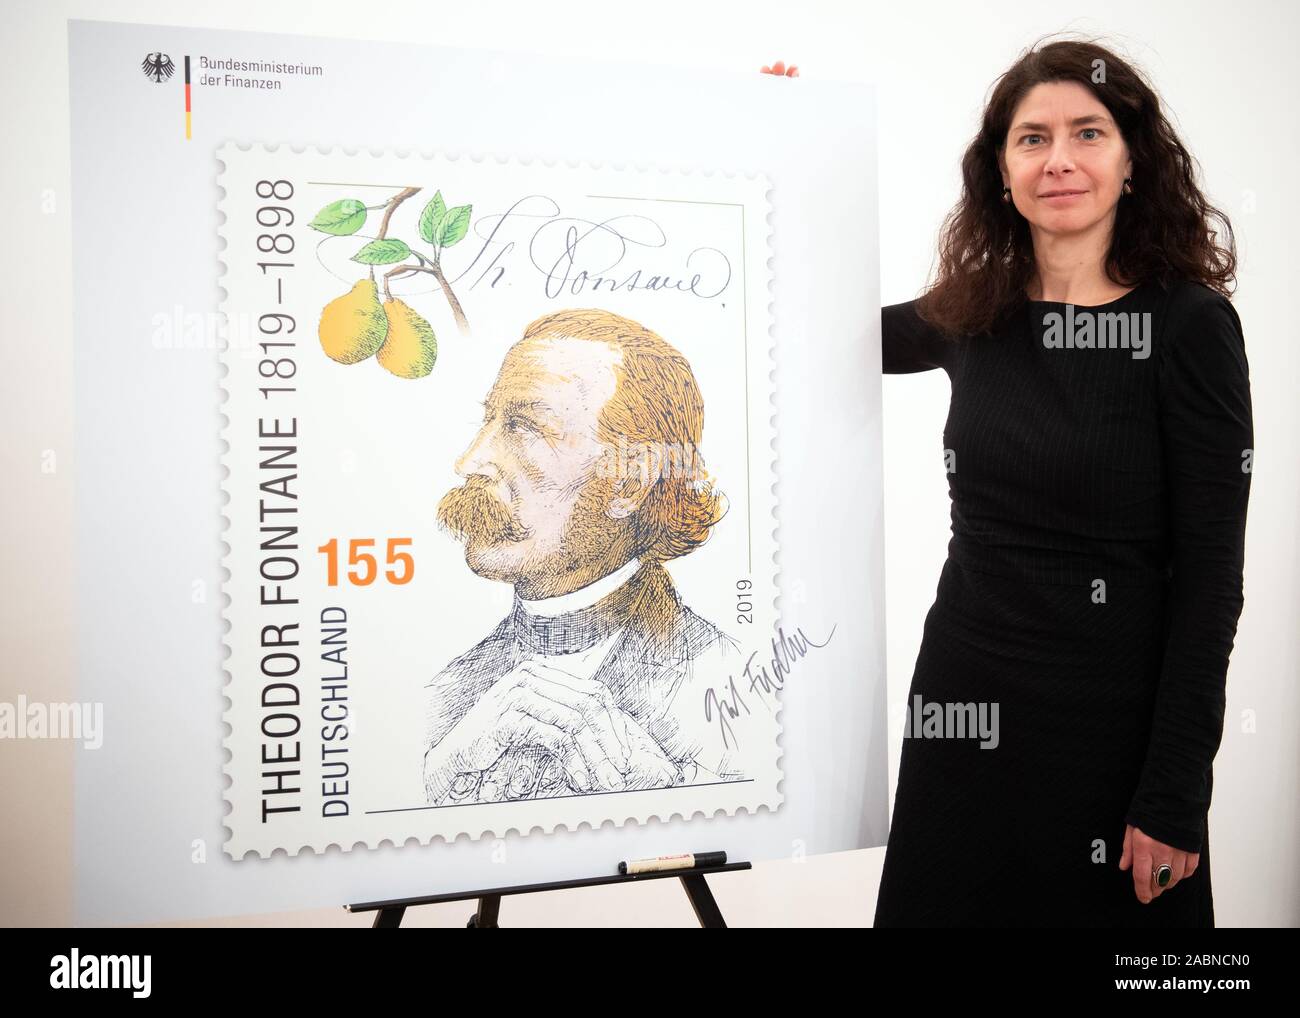 Neuruppin, Germany. 28th Nov, 2019. The Leipzig artist Grit Fiedler, designer of the stamp '200. birthday Theodor Fontane', stands next to an oversized expression after the presentation of the stamp. The portrait drawing is by the Kleinmachnoiwer graphic artist and draughtsman Rainer Ehrt. The stamp will be available in Deutsche Post sales outlets from 05.12.2019 and has a value of 155 cents. Credit: Soeren Stache/dpa/Alamy Live News Stock Photo